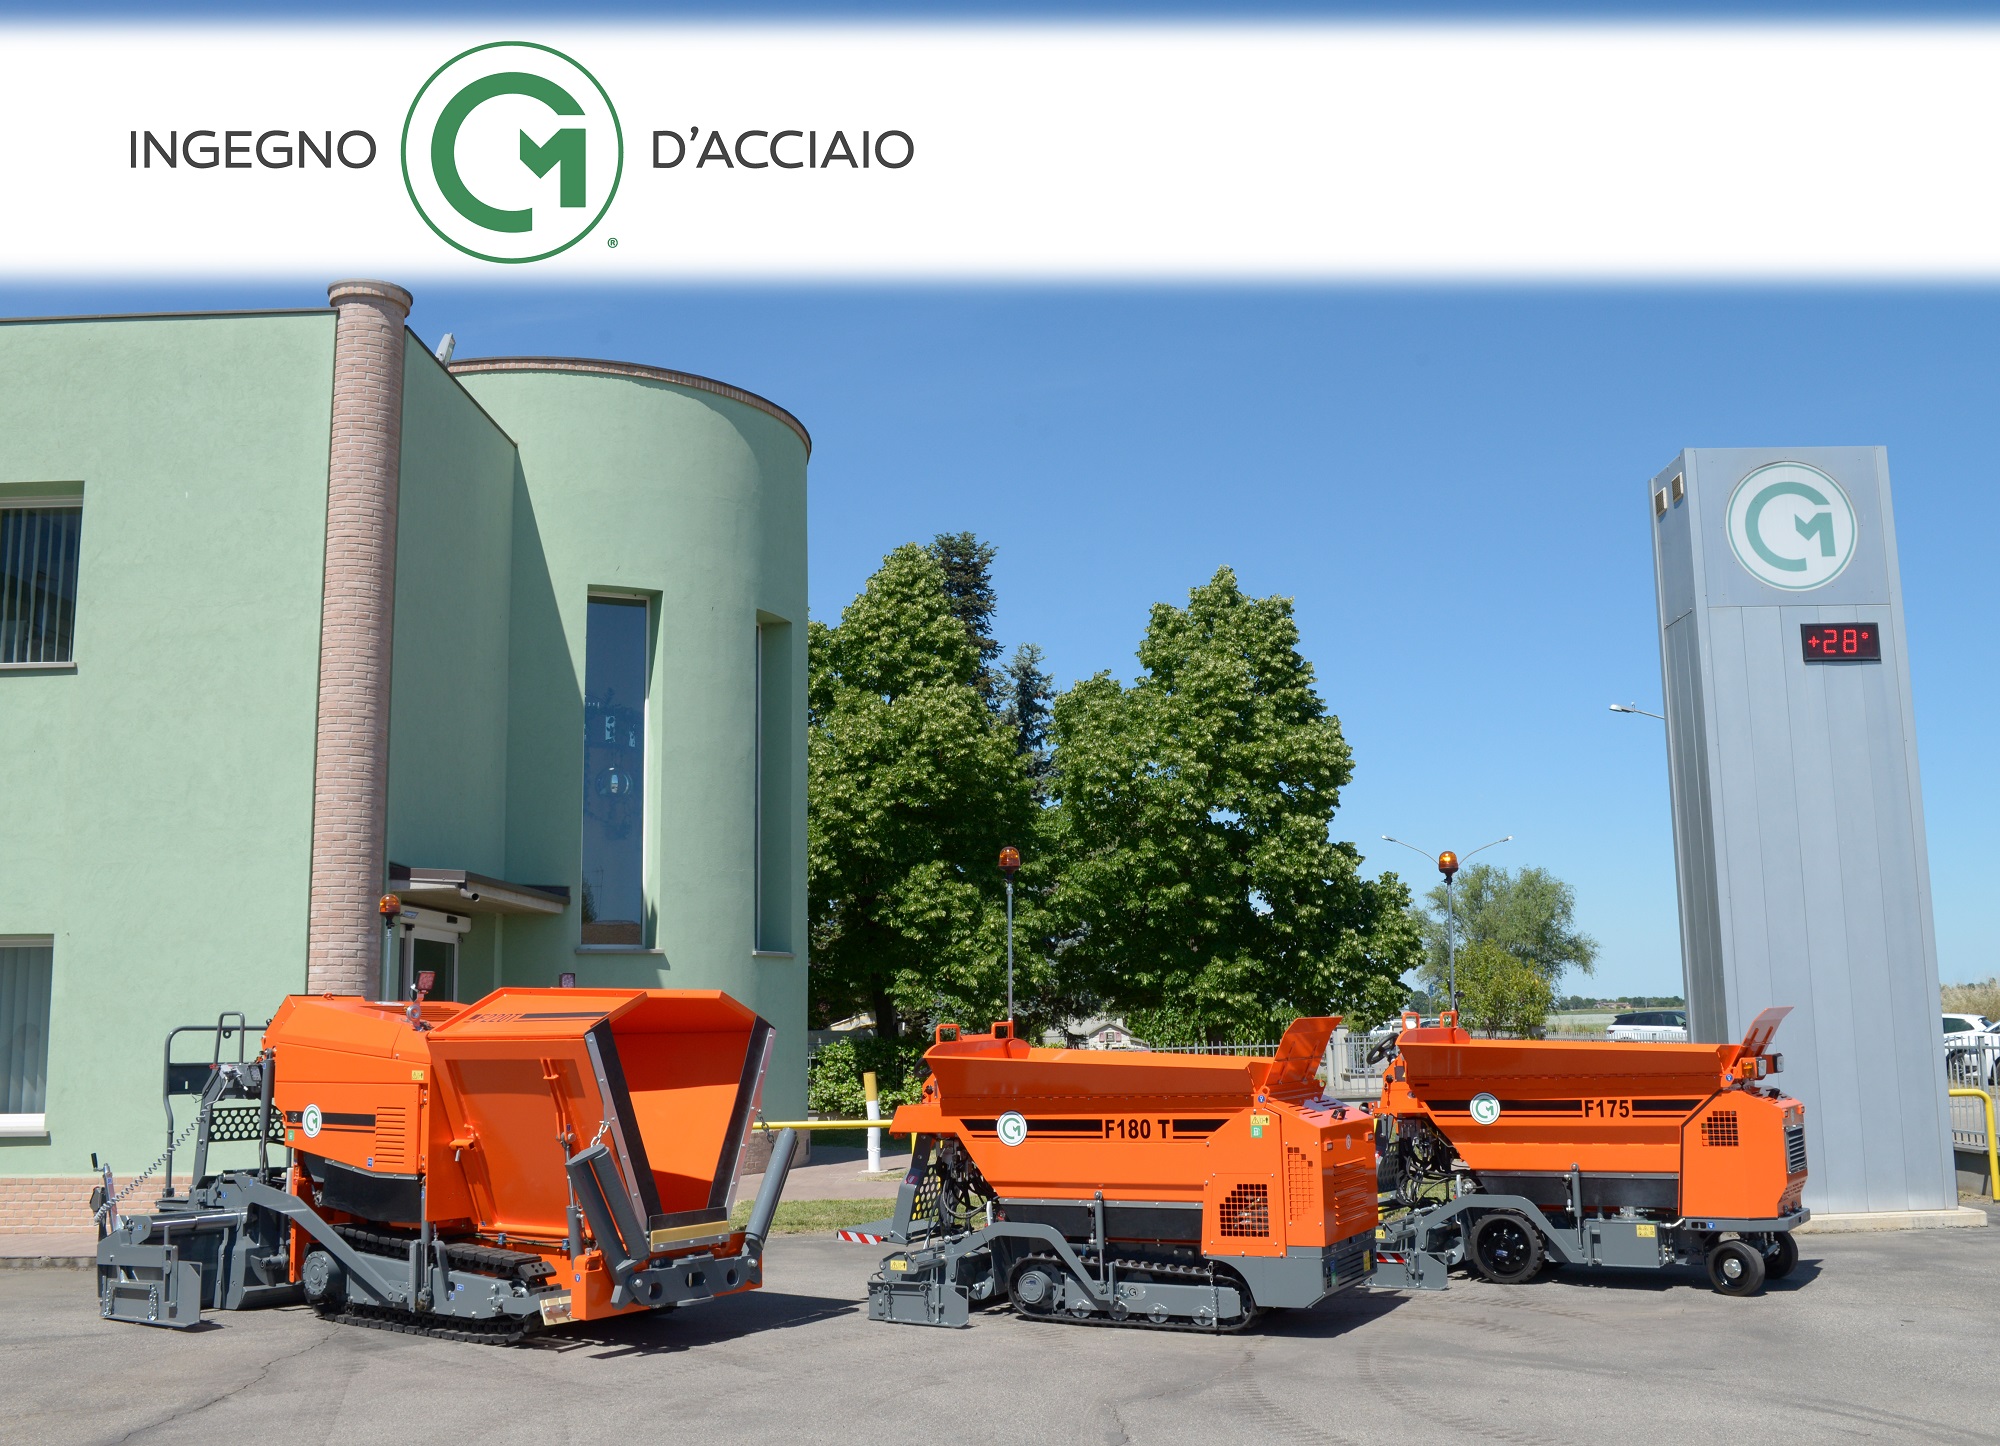 The pavers made by the Italian company CM will take part in the Asphaltica showcase